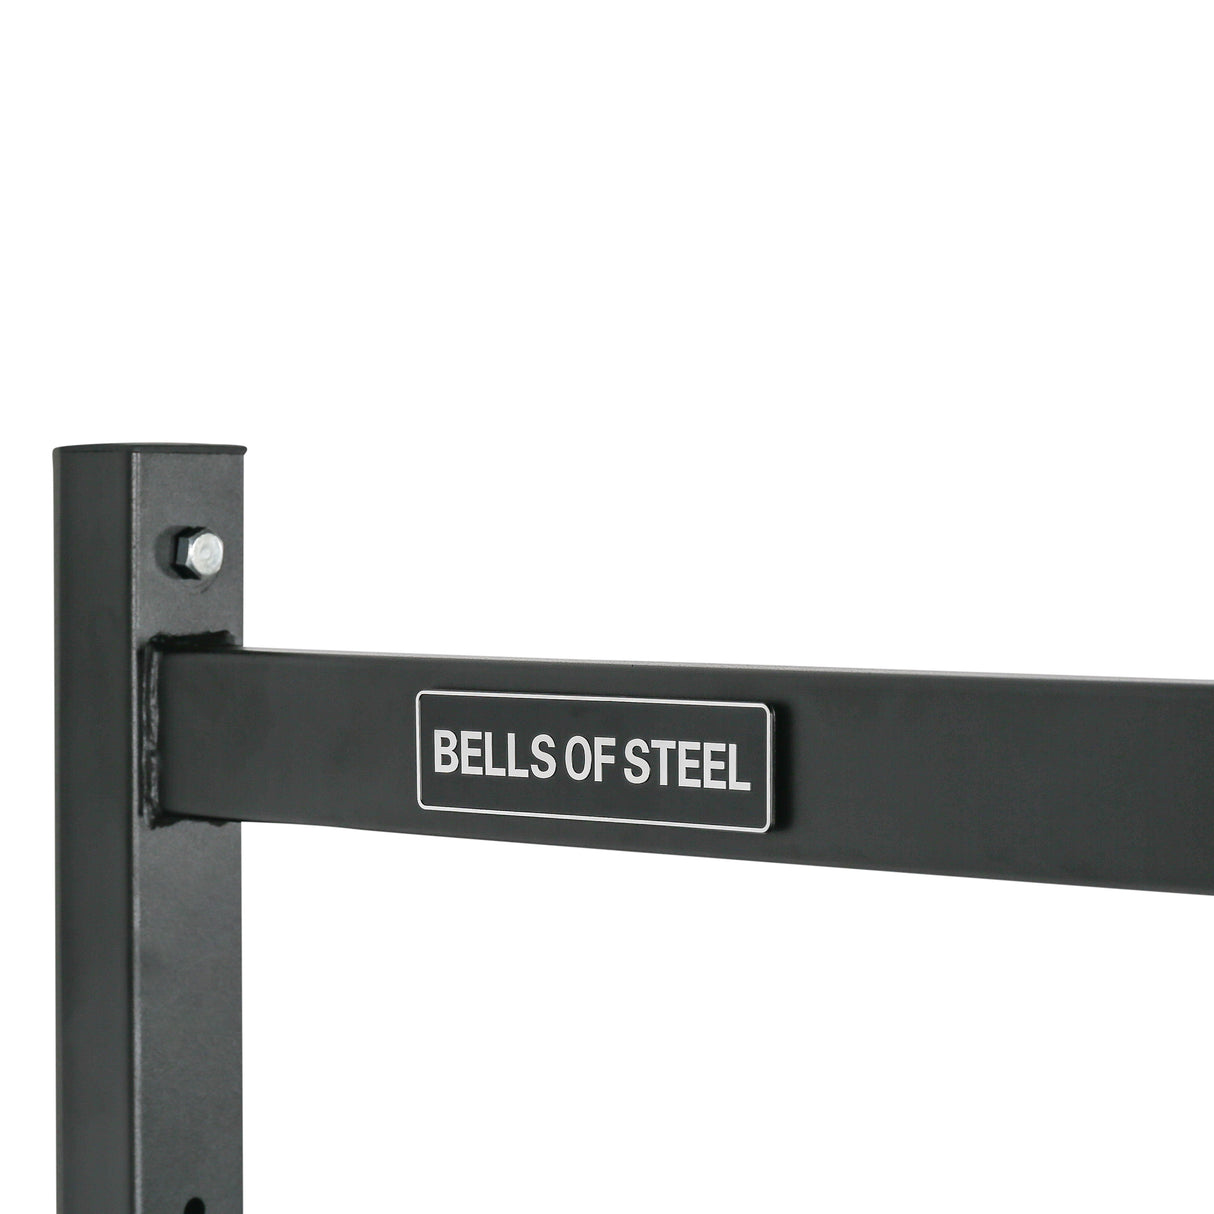 Adjustable Wall Or Ceiling Mounted Pull Up Bar showing the Bells of Steel logo